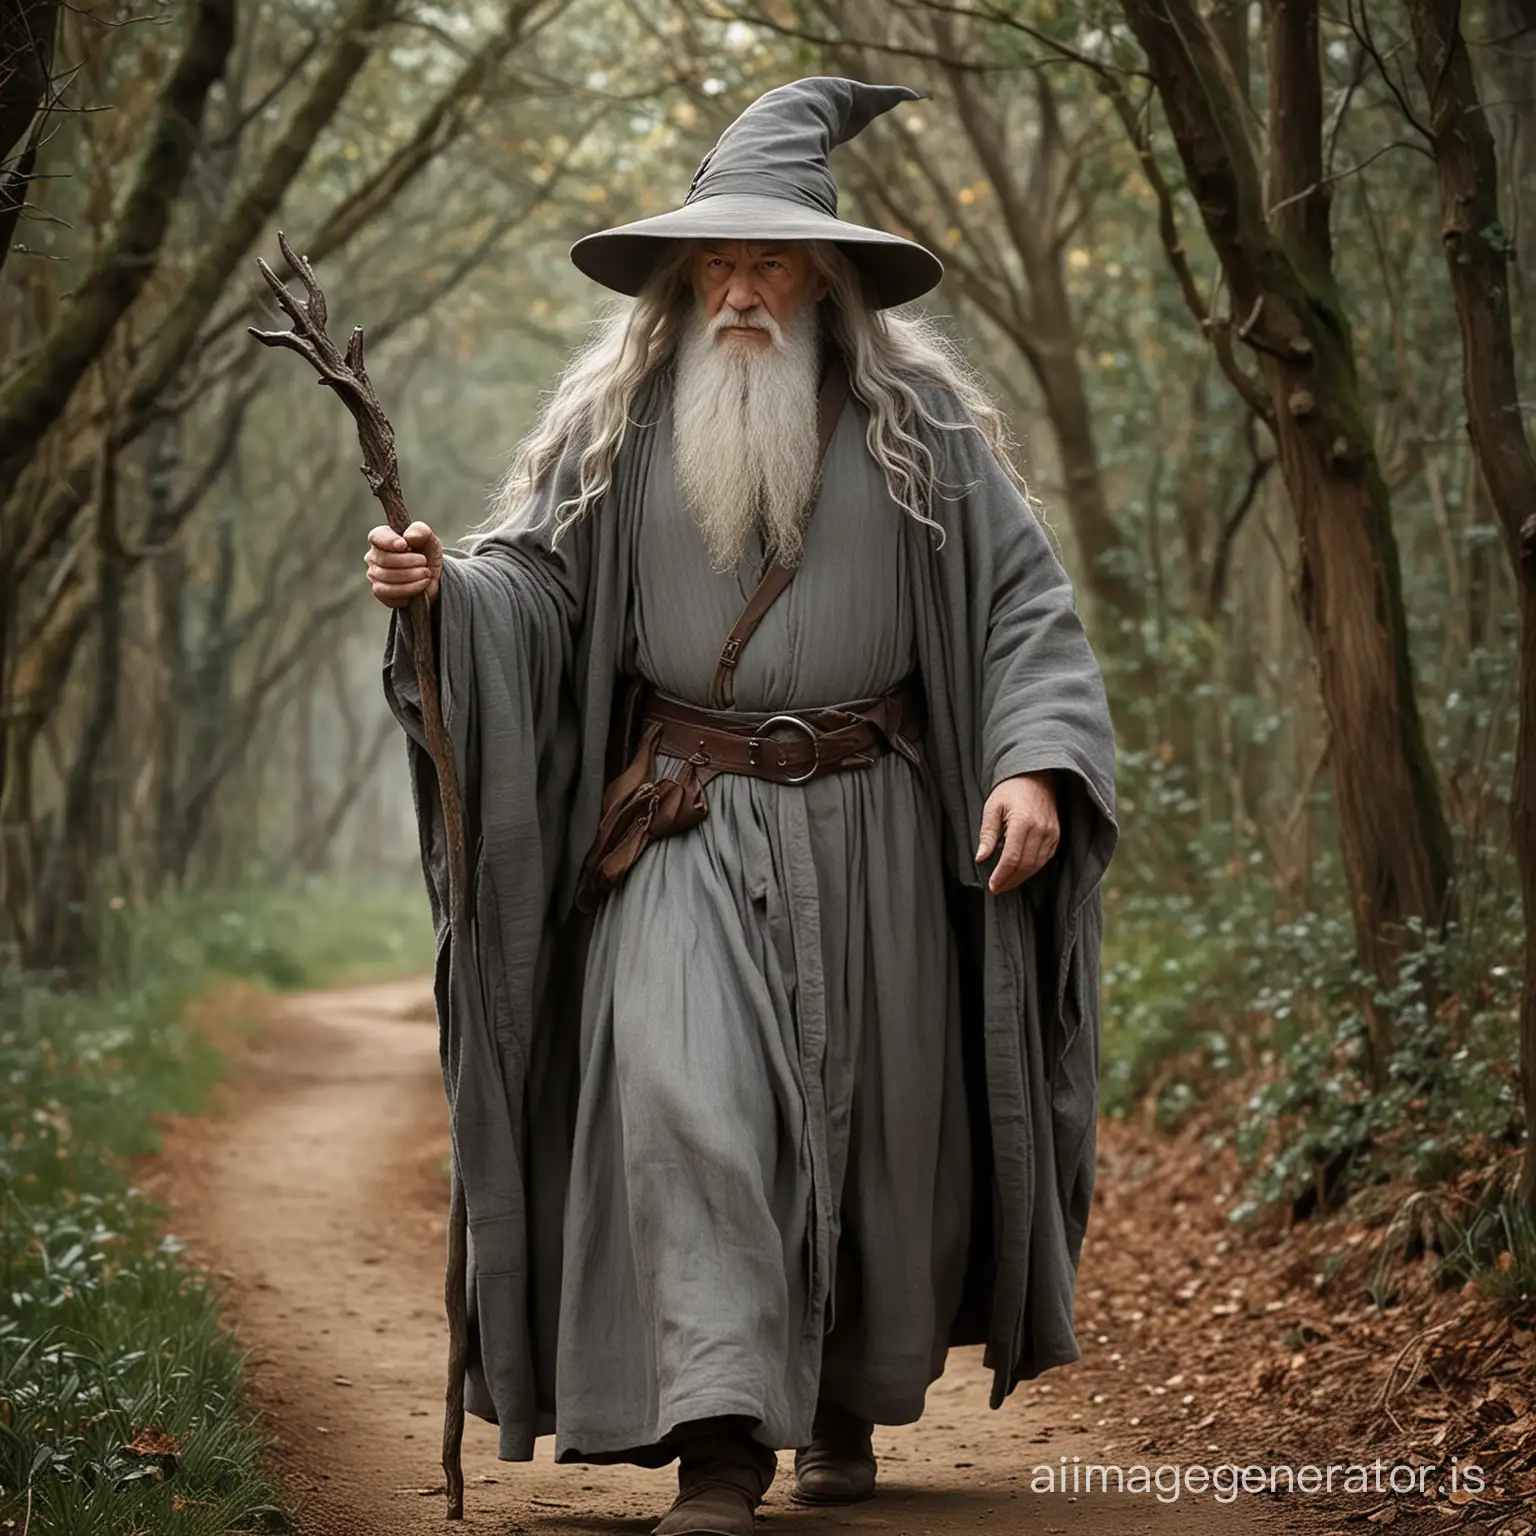 Gandalf-the-Grey-Wise-Wizard-with-Long-White-Hair-and-Staff